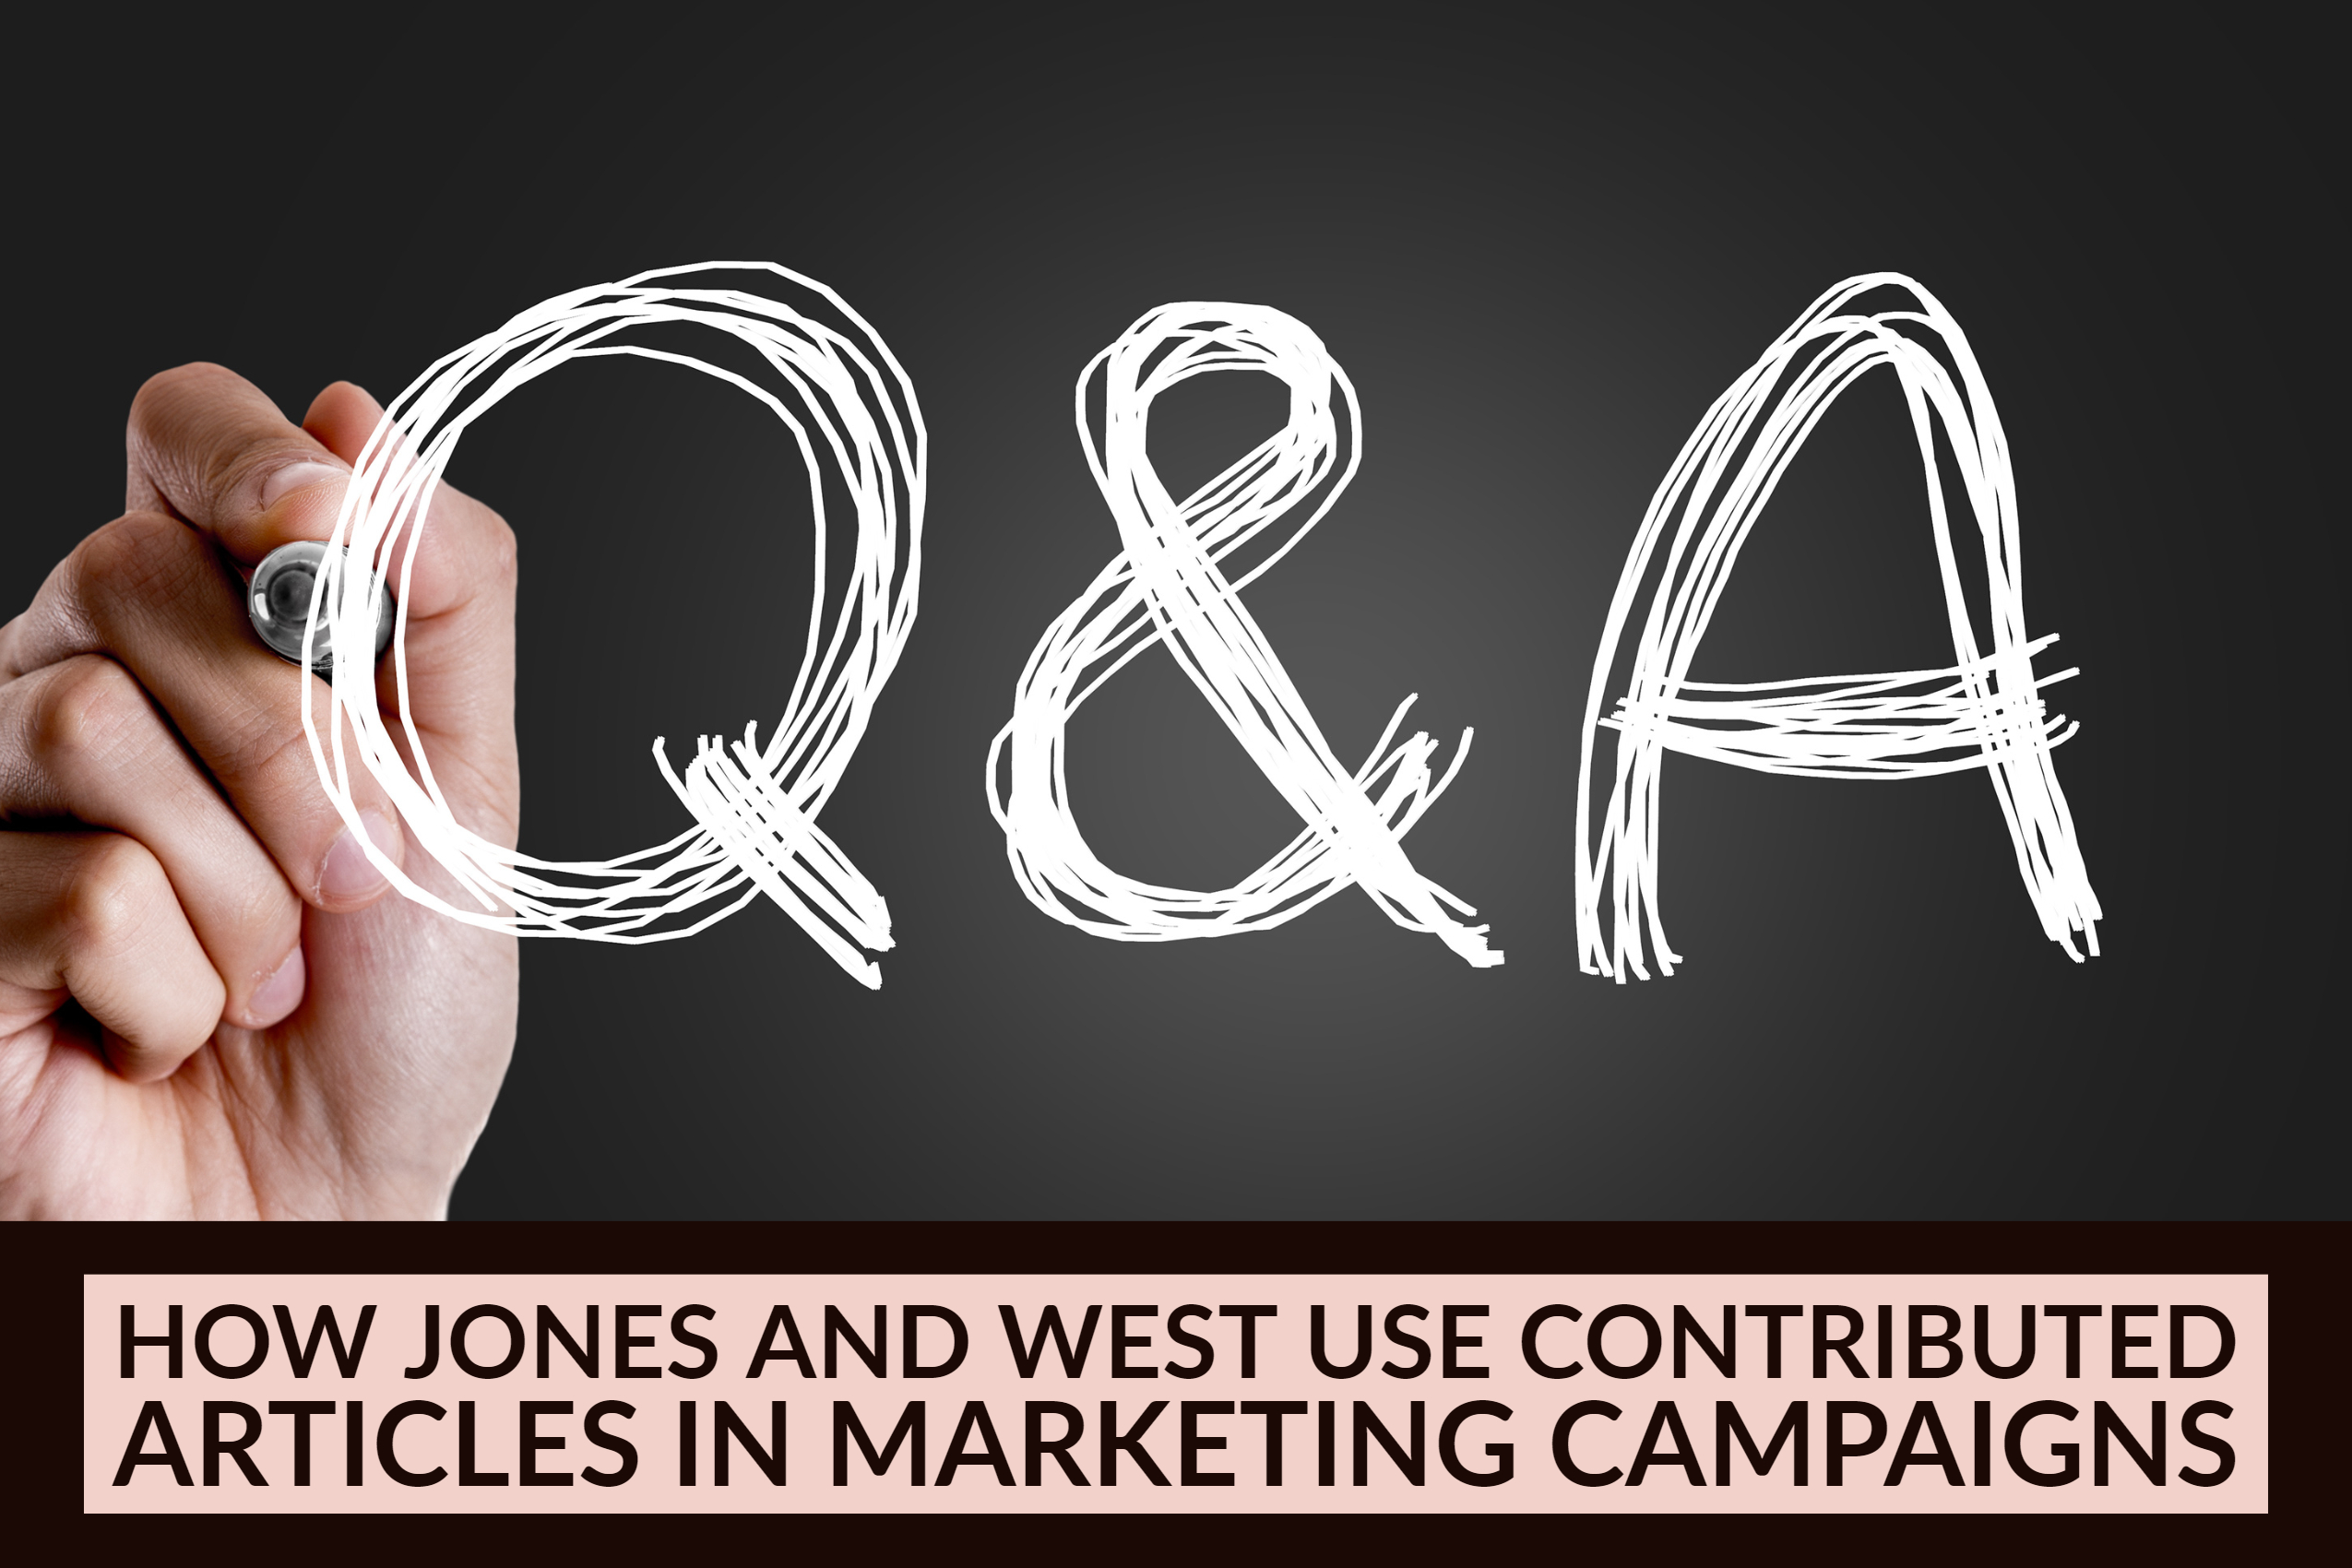 Q&A: How JONES and West Use Contributed Articles In Marketing Campaigns